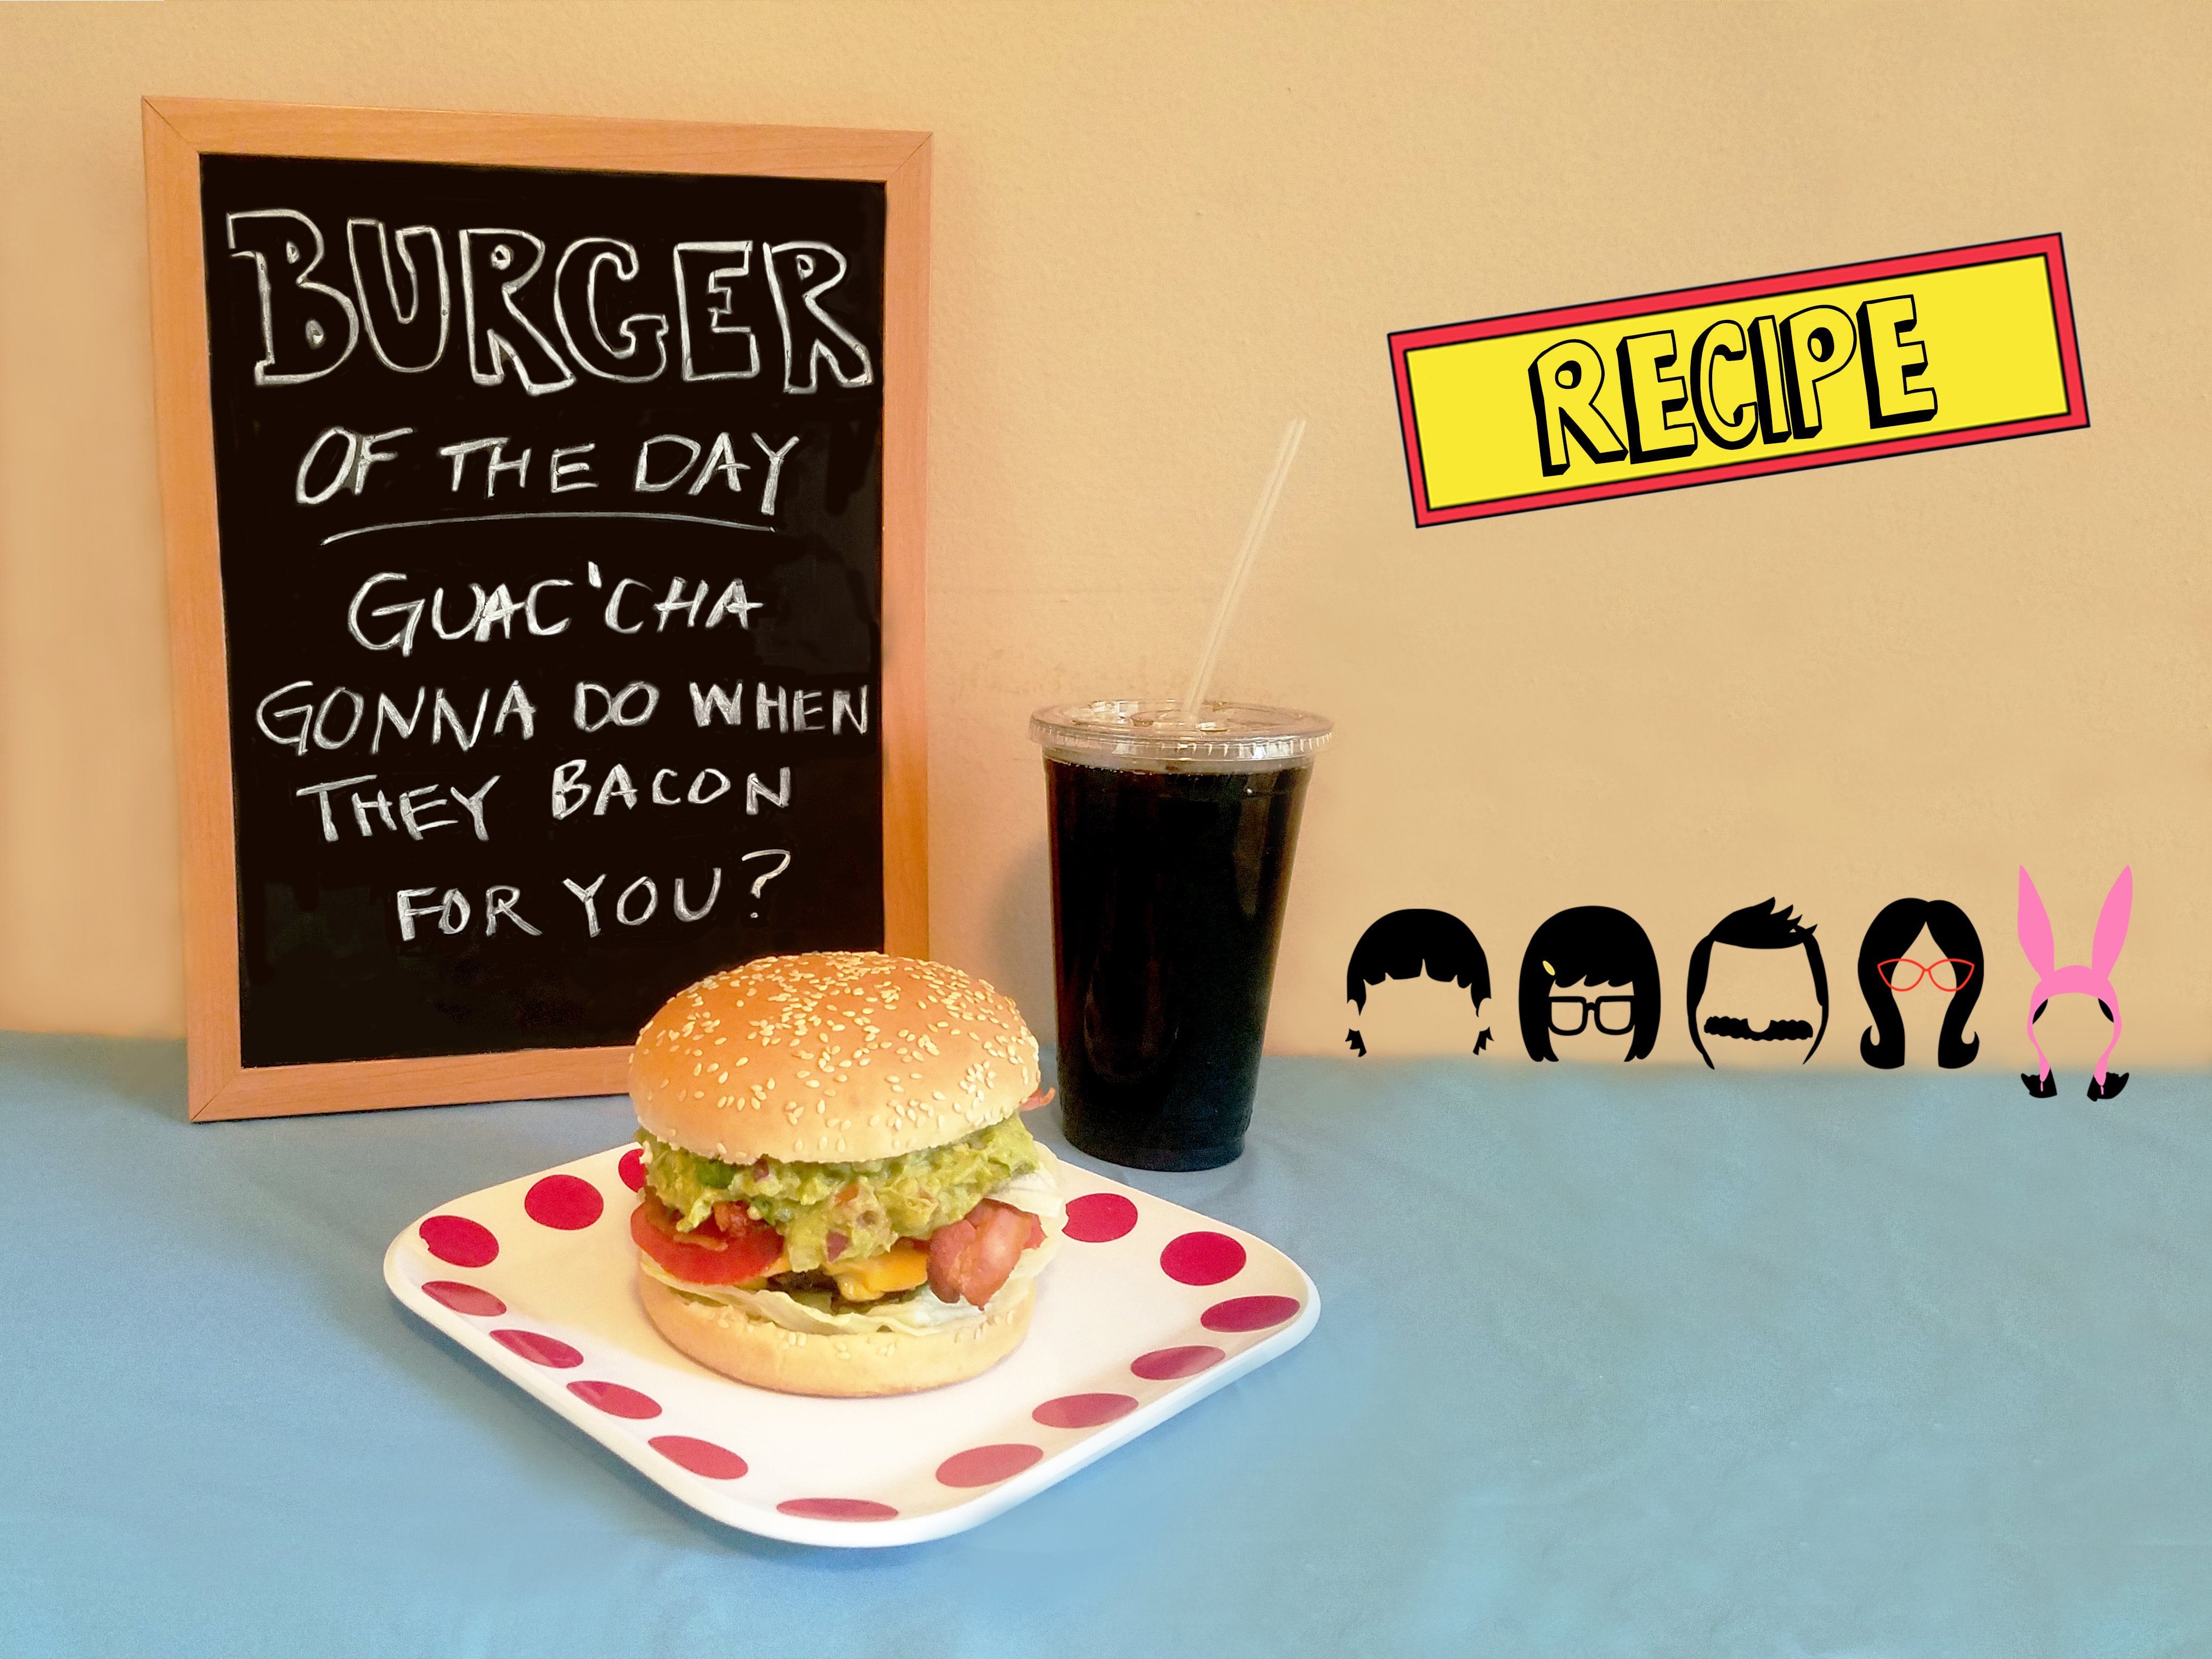 Burger Of the Month!: ‘Guac’cha Gonna Do When They Bacon for You’